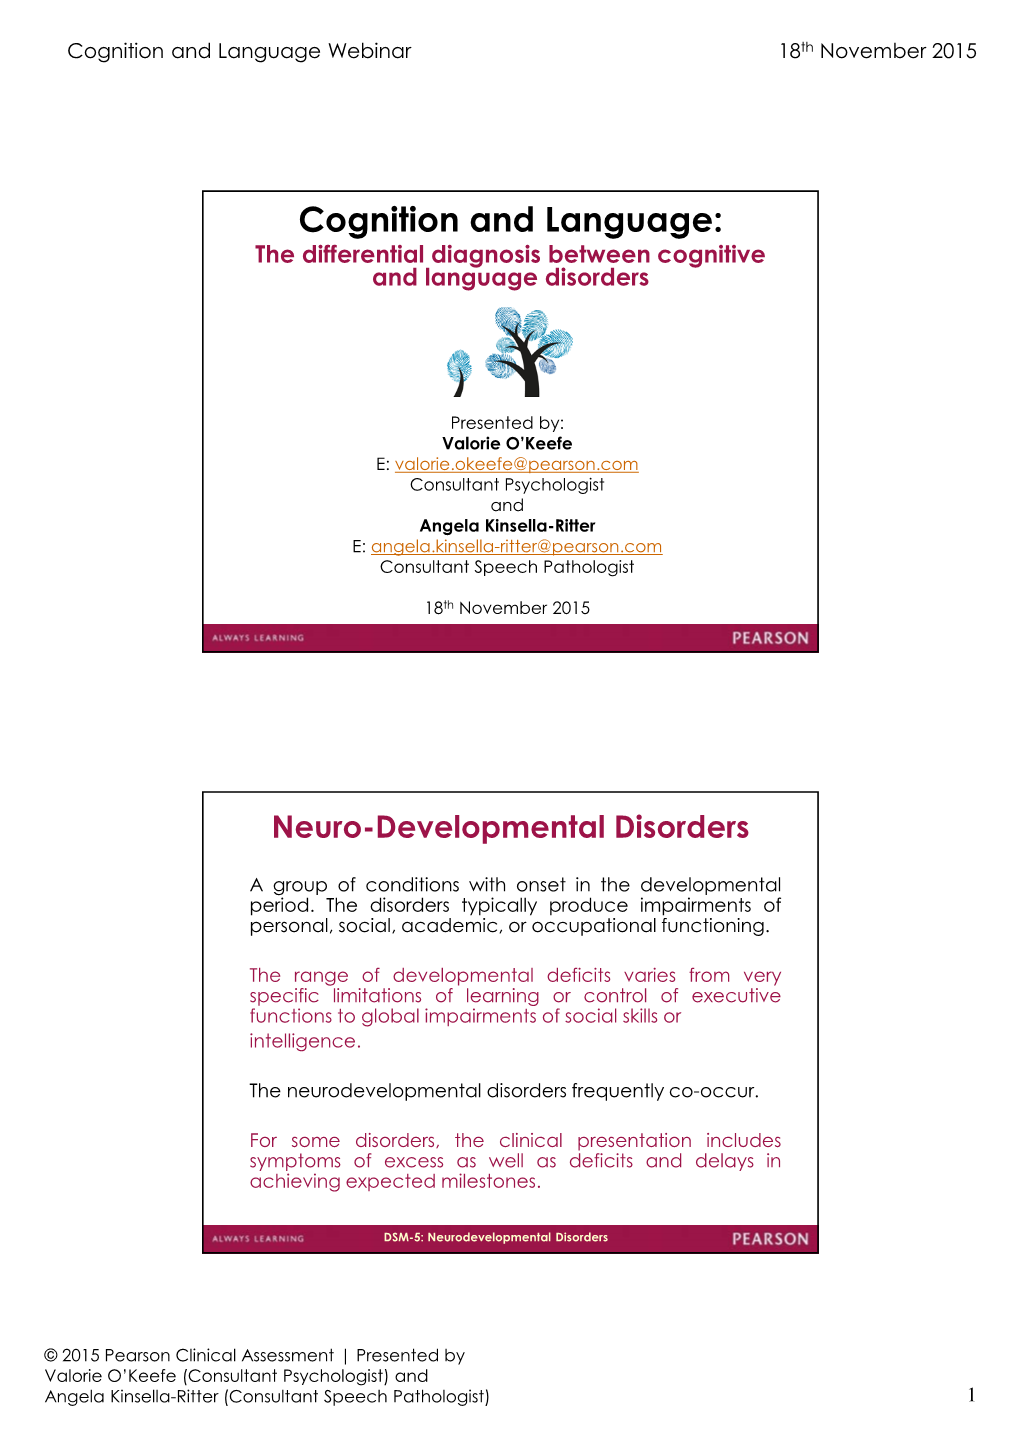 Cognition and Language: the Differential Diagnosis Between Cognitive and Language Disorders